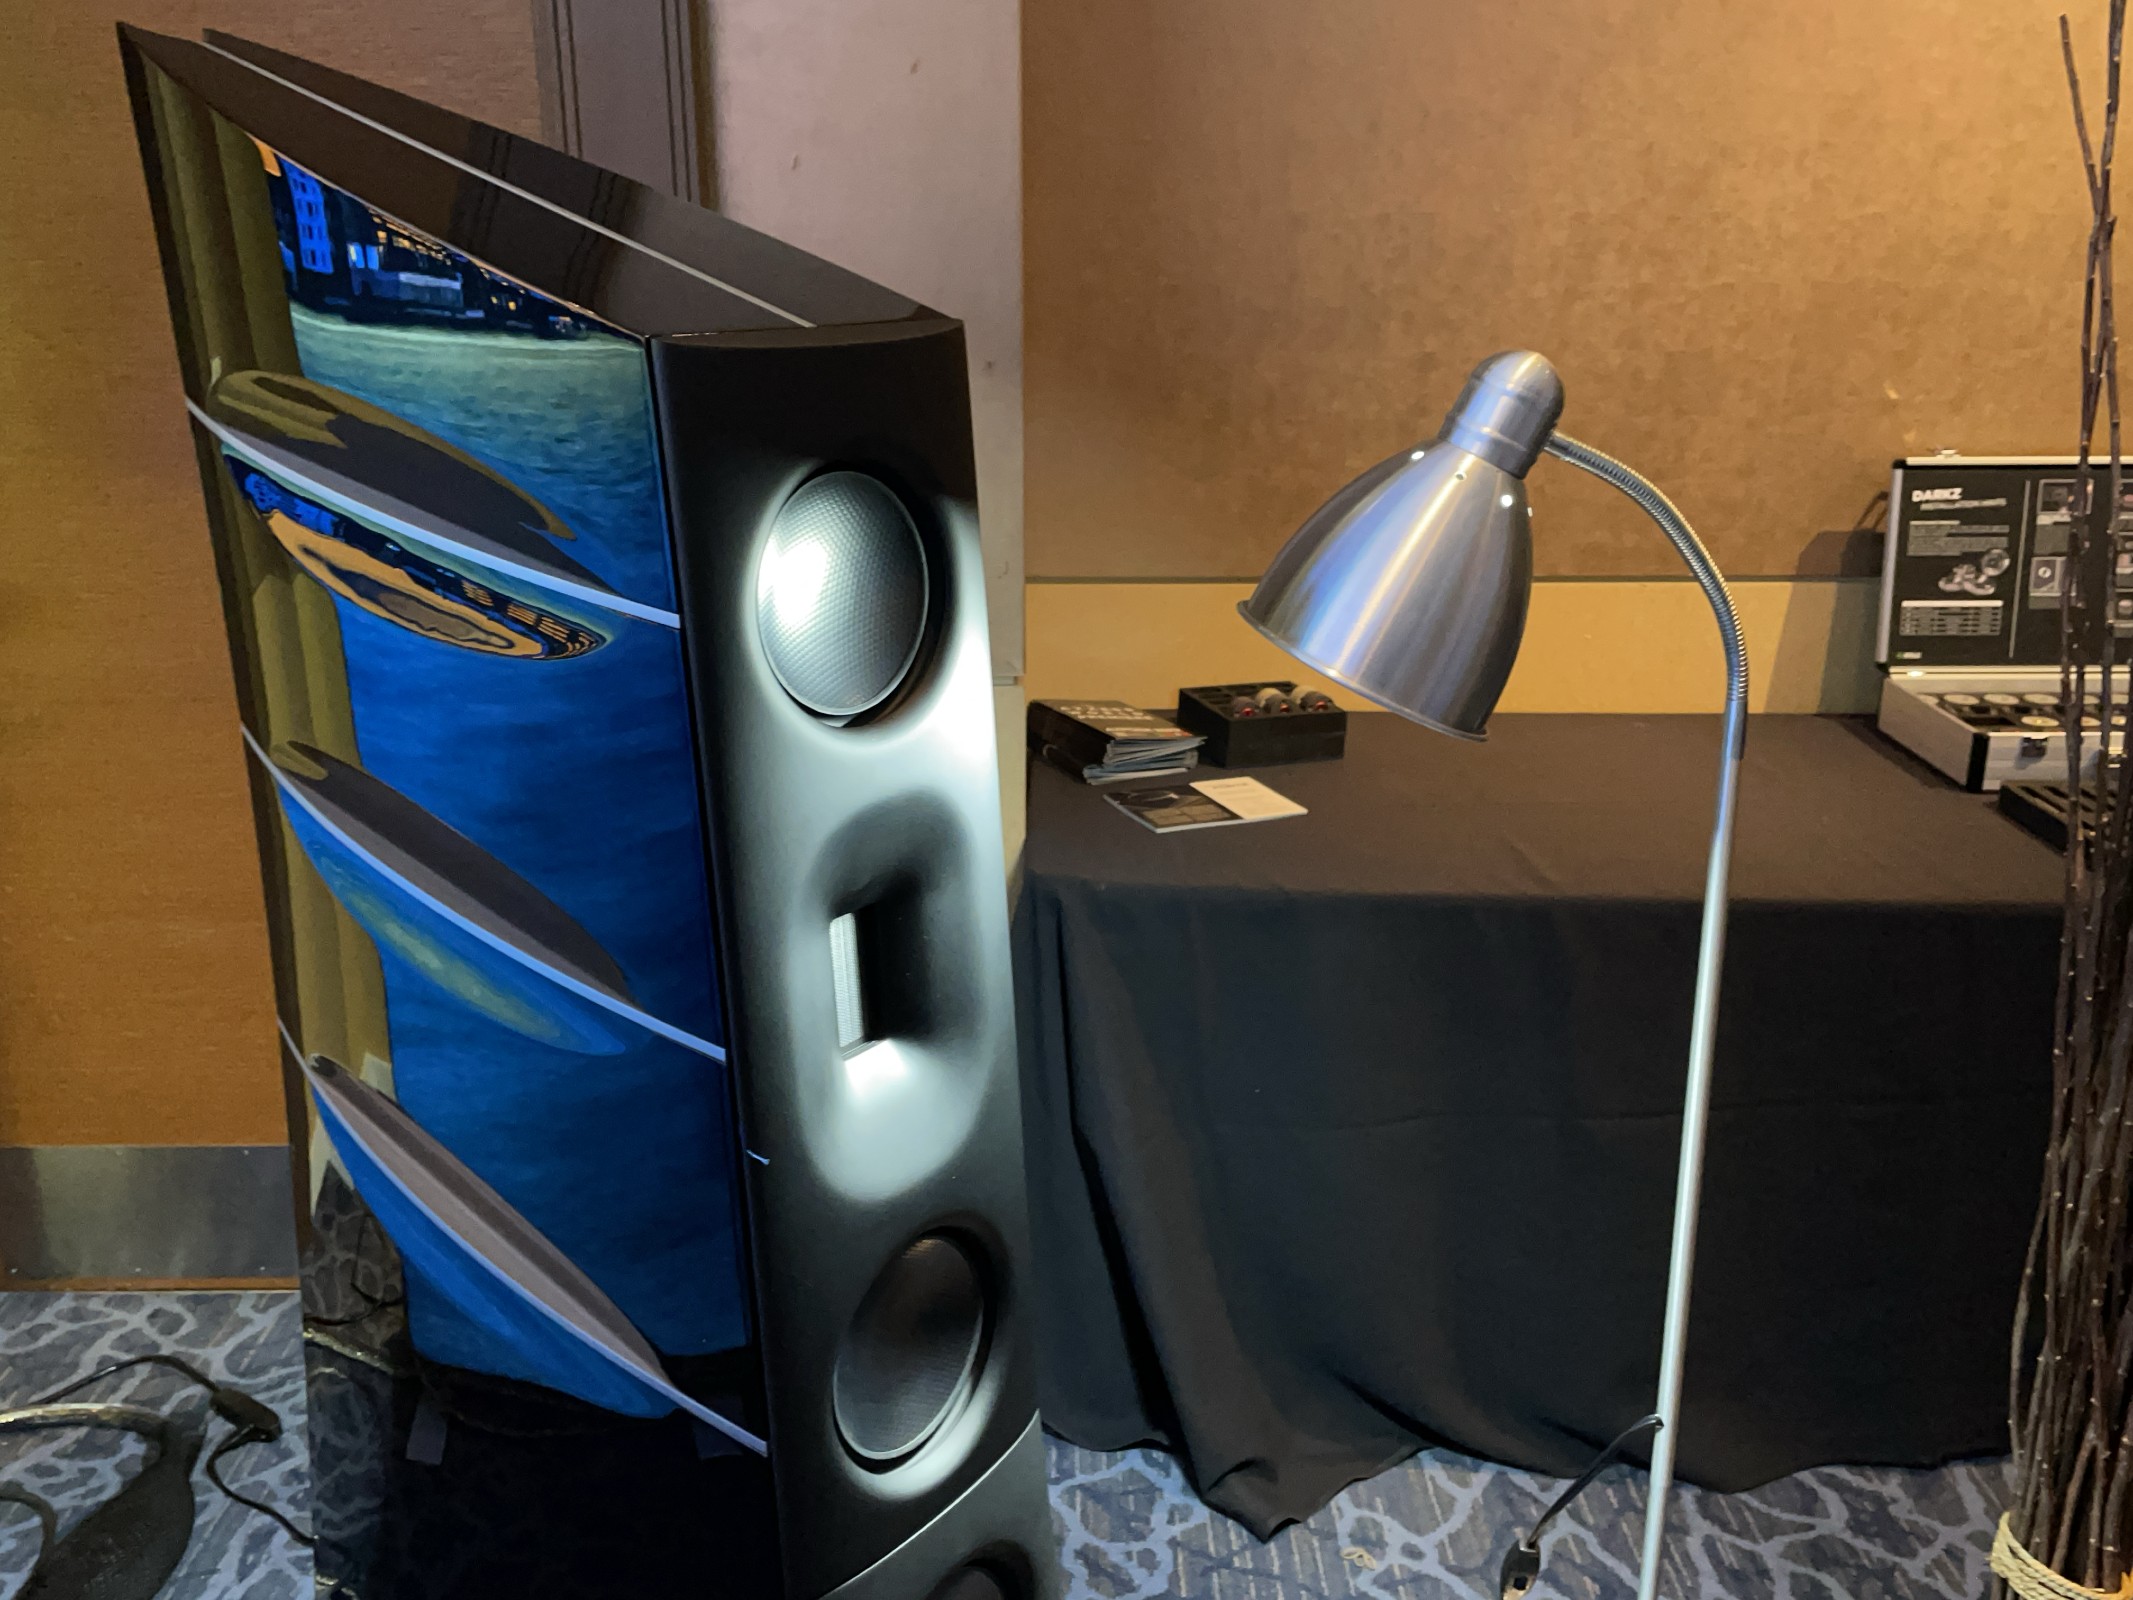 Ultra-high-end Magico introduces least costly home theater